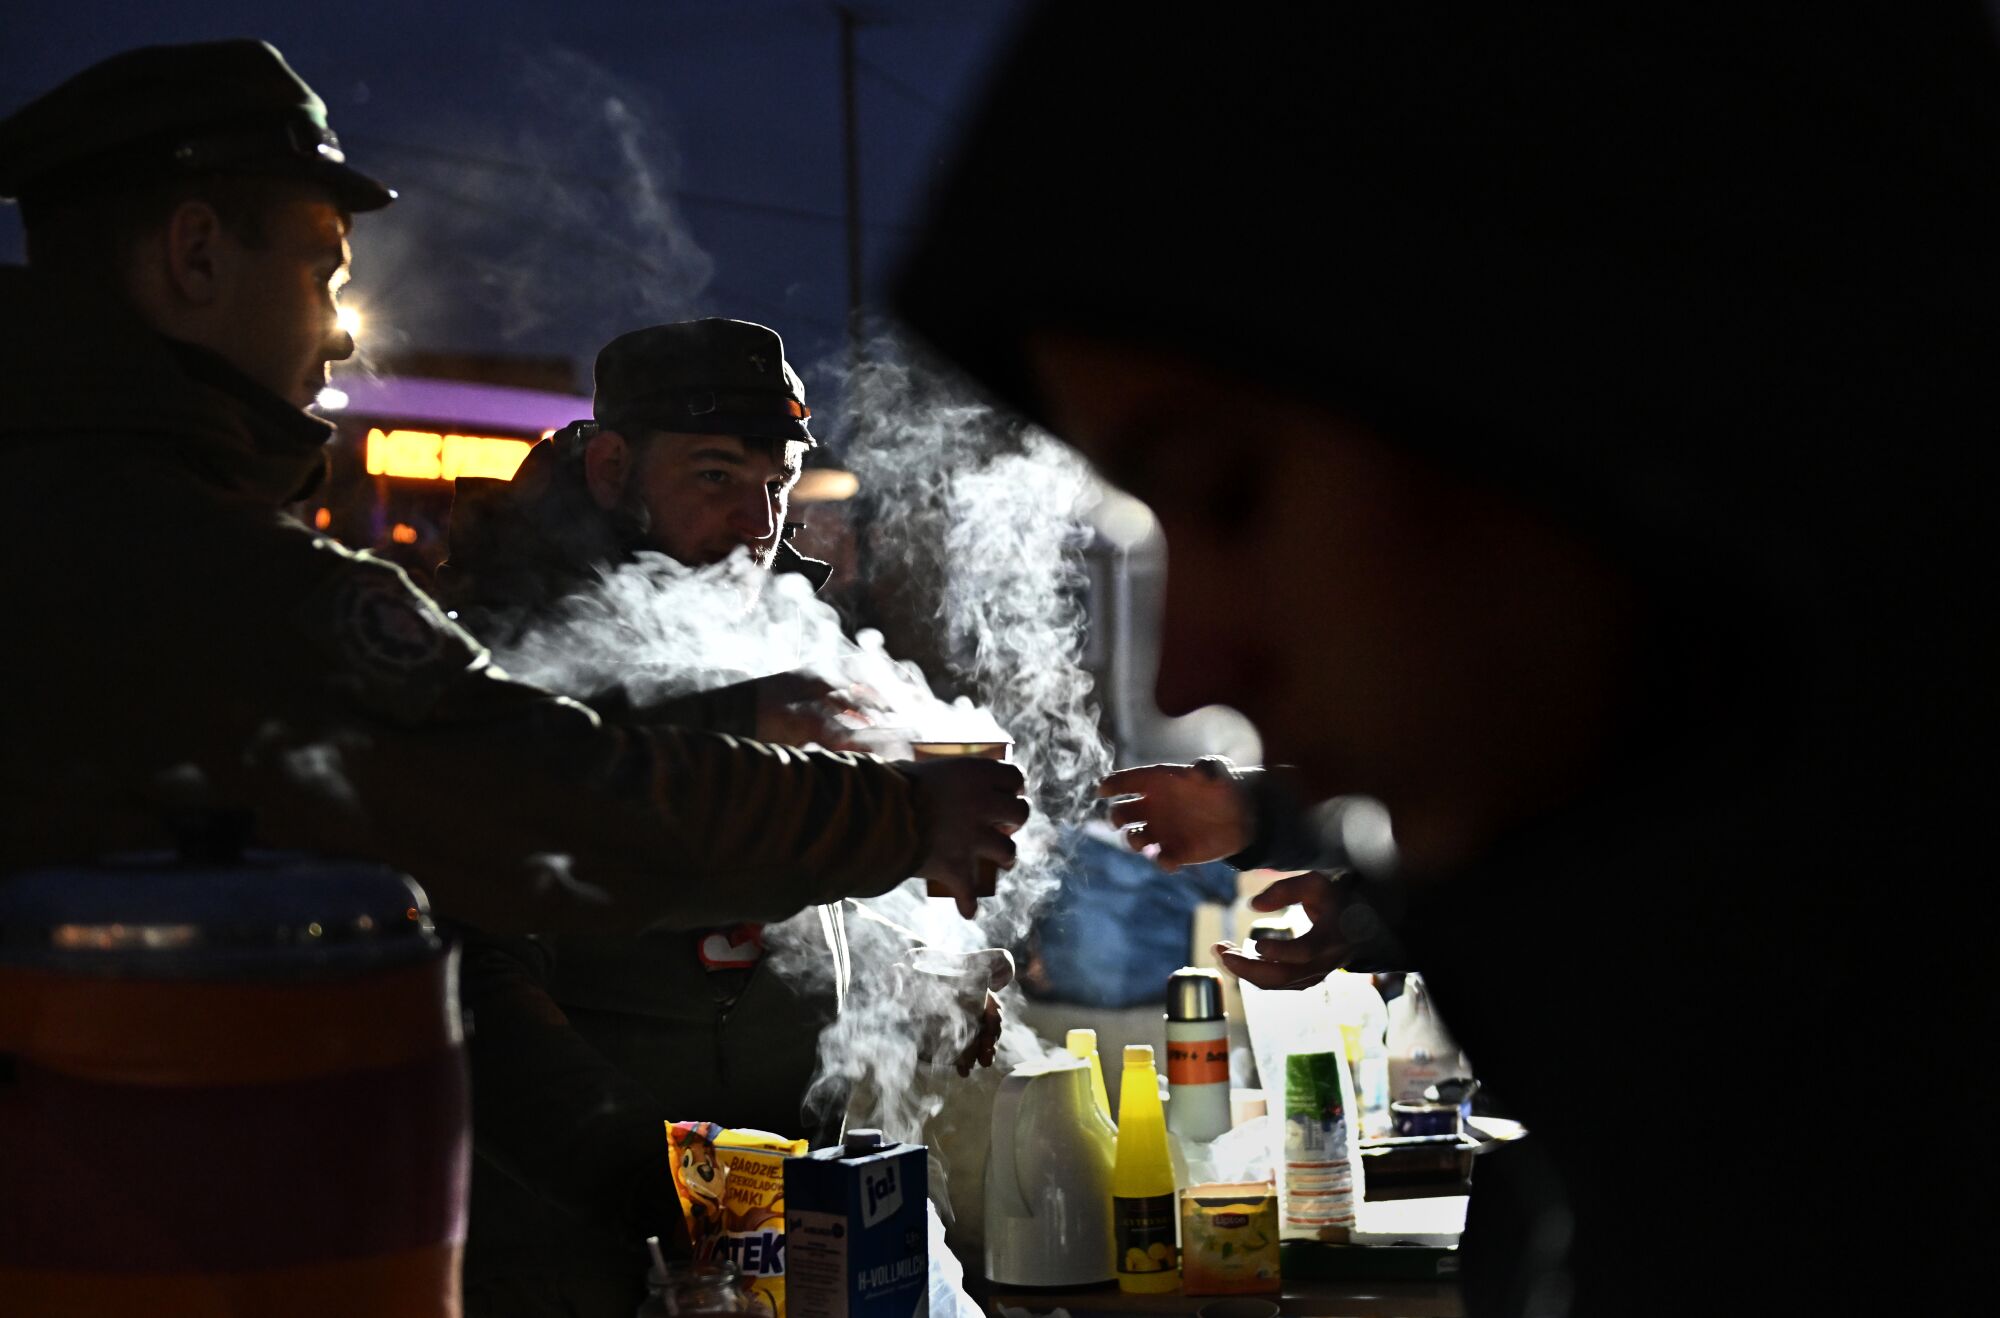 Volunteers serve coffee to Ukrainian refugees on a cold evening in Medyka, Poland.